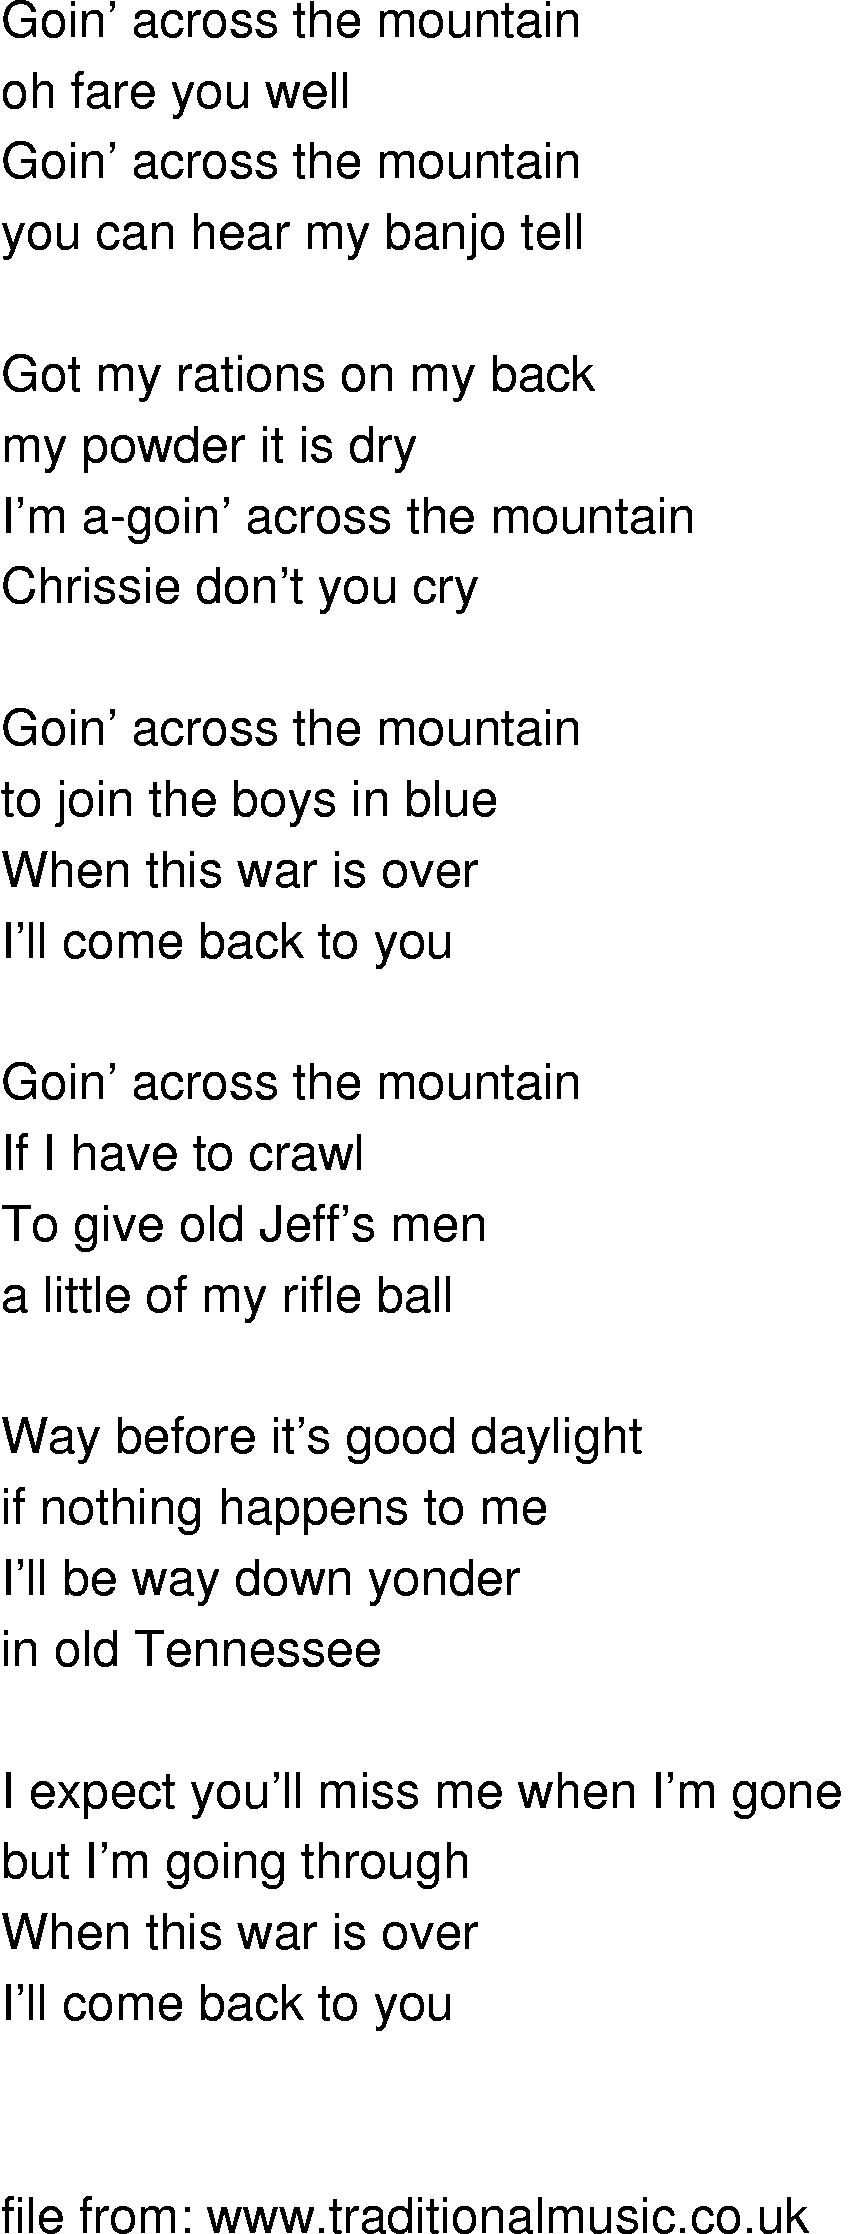 Old-Time (oldtimey) Song Lyrics - going across the mountain